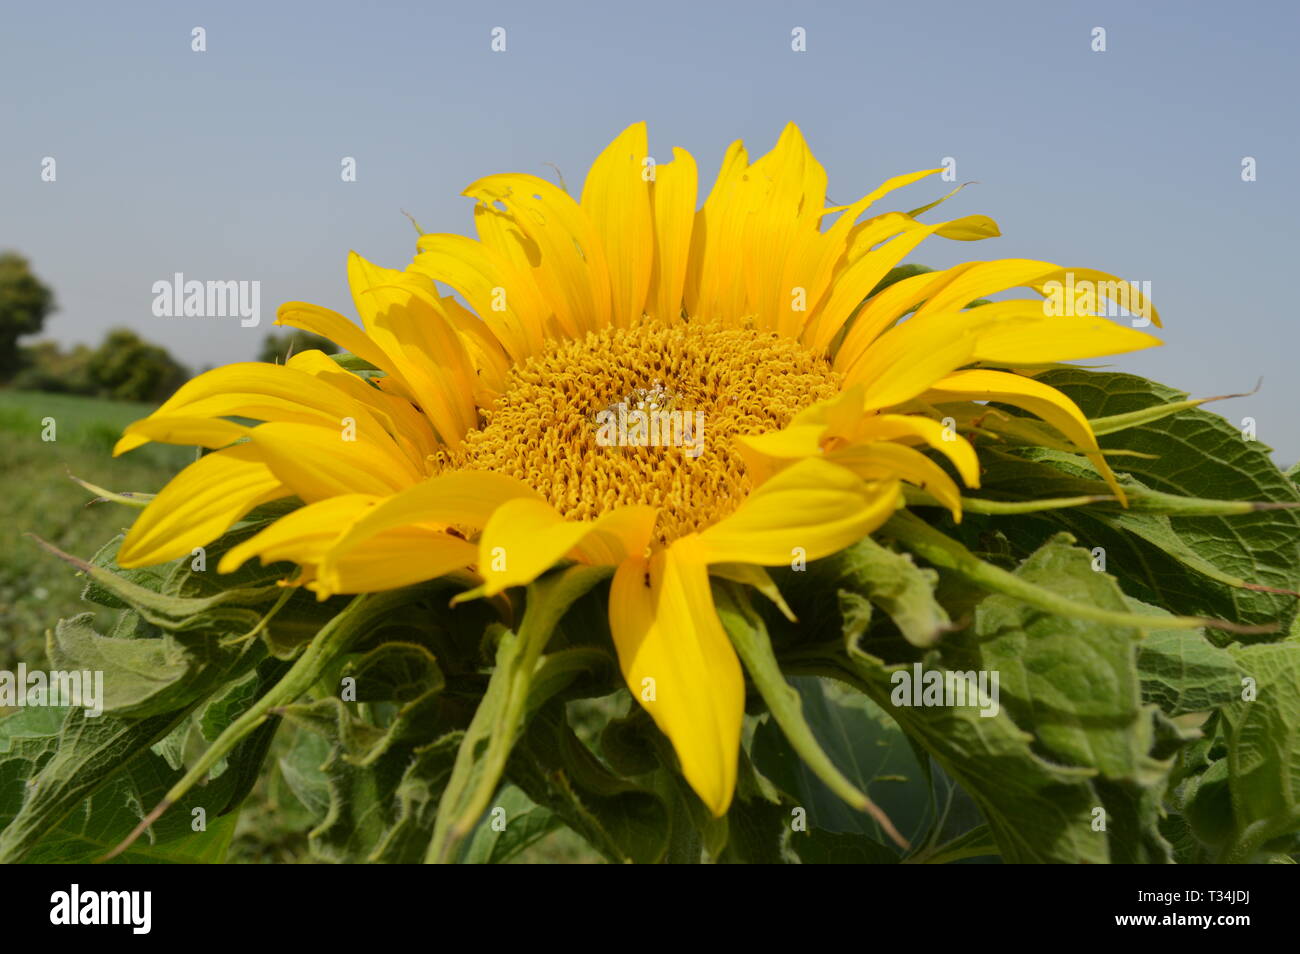 Sunflower with Green Leaf, Beautiful Yellow Sunflower India, Agricultural Field, Agriculture, Beauty In Nature, Botany, The common sunflower Stock Photo